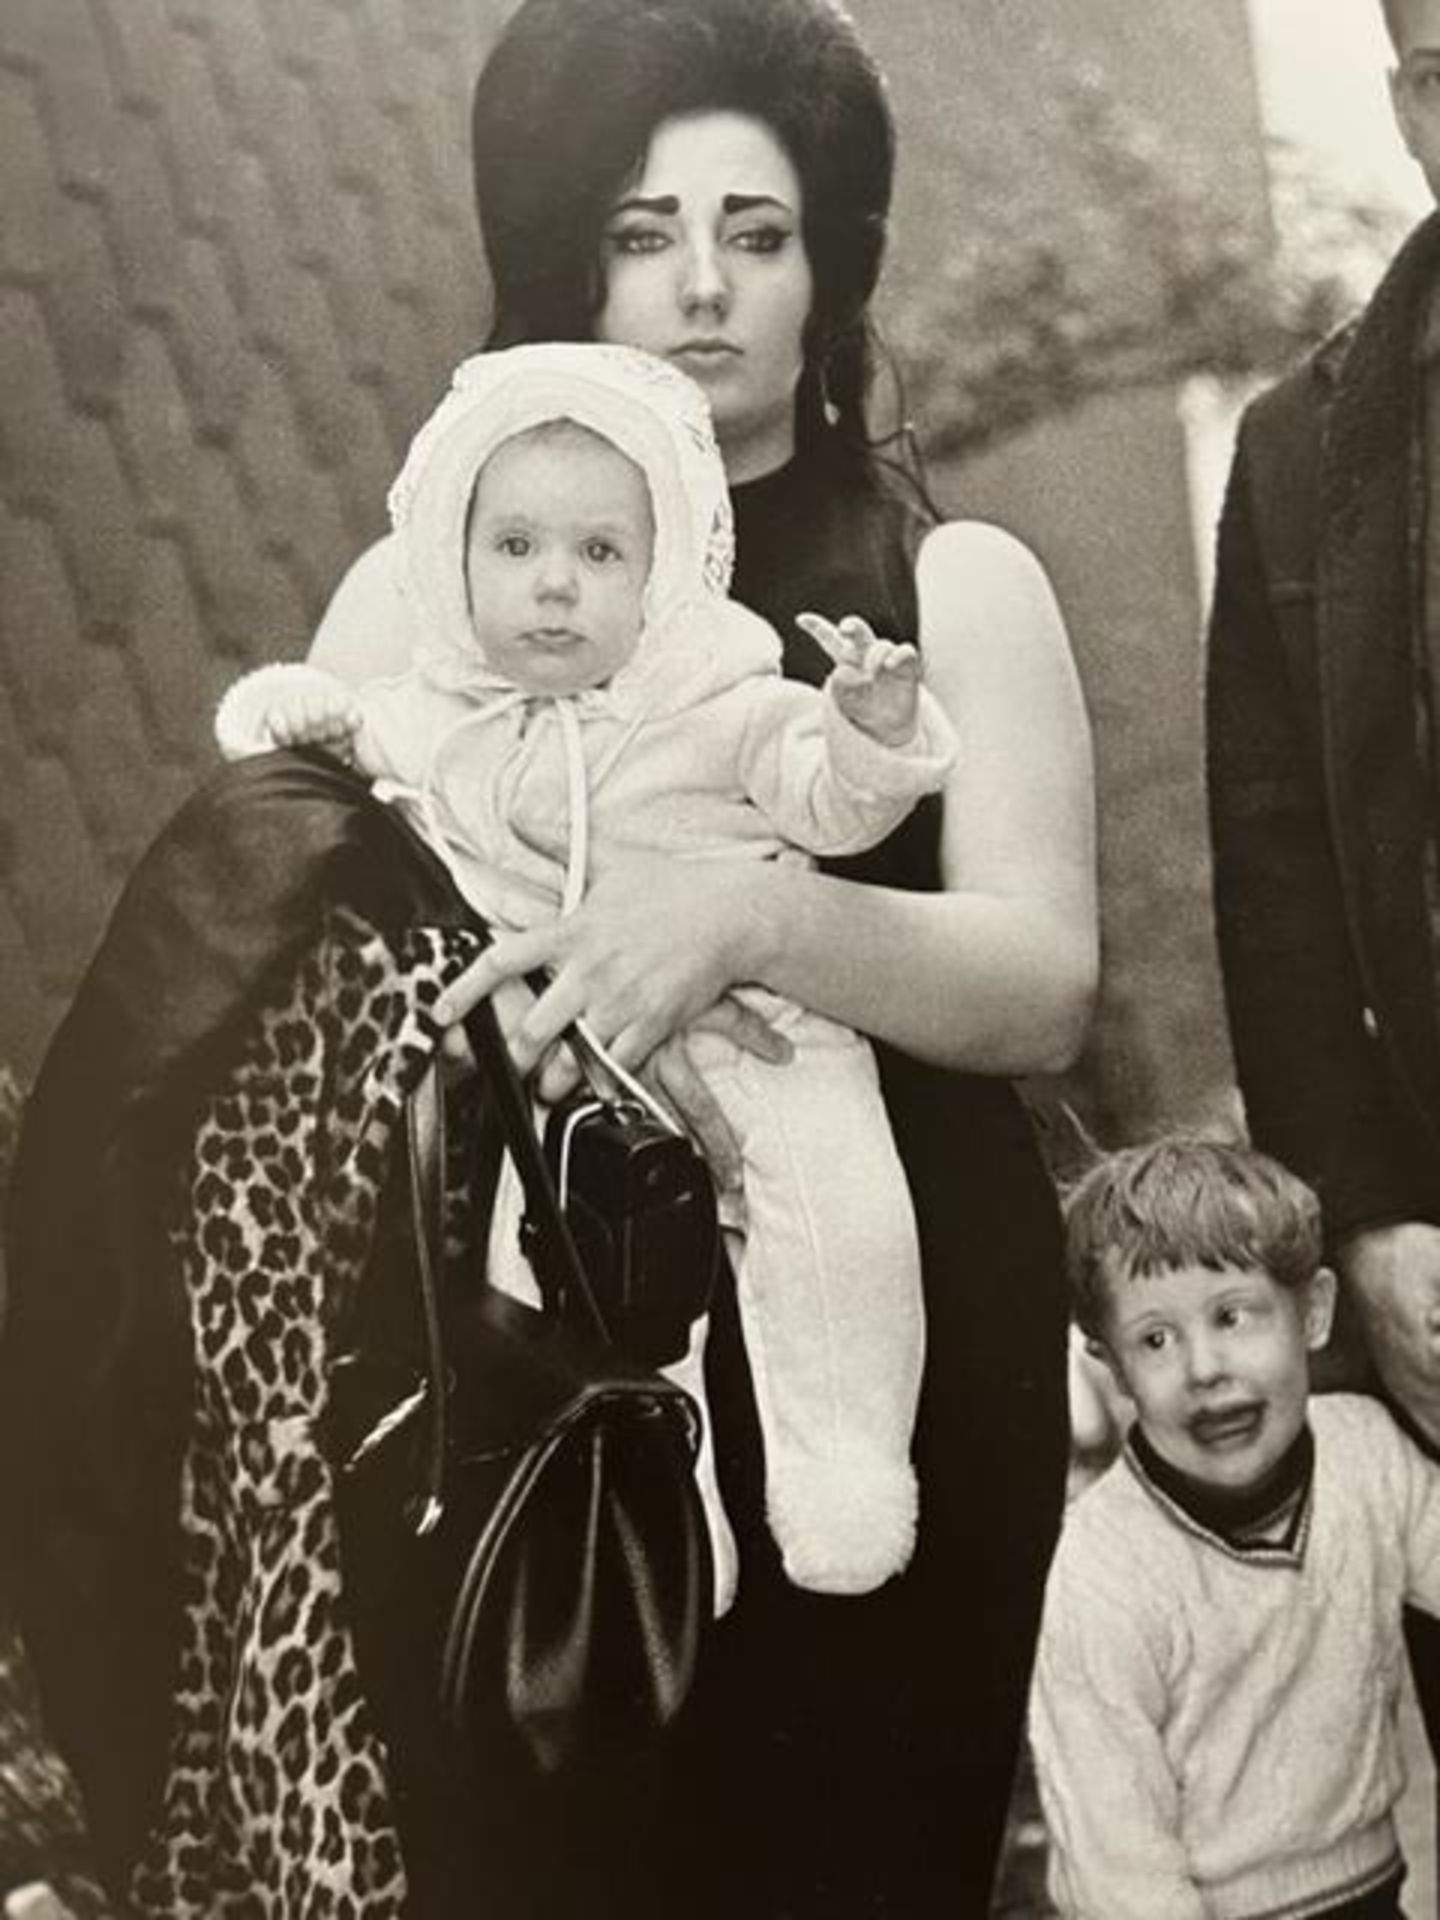 Diane Arbus "A young Brooklyn Family" Print. - Image 4 of 6